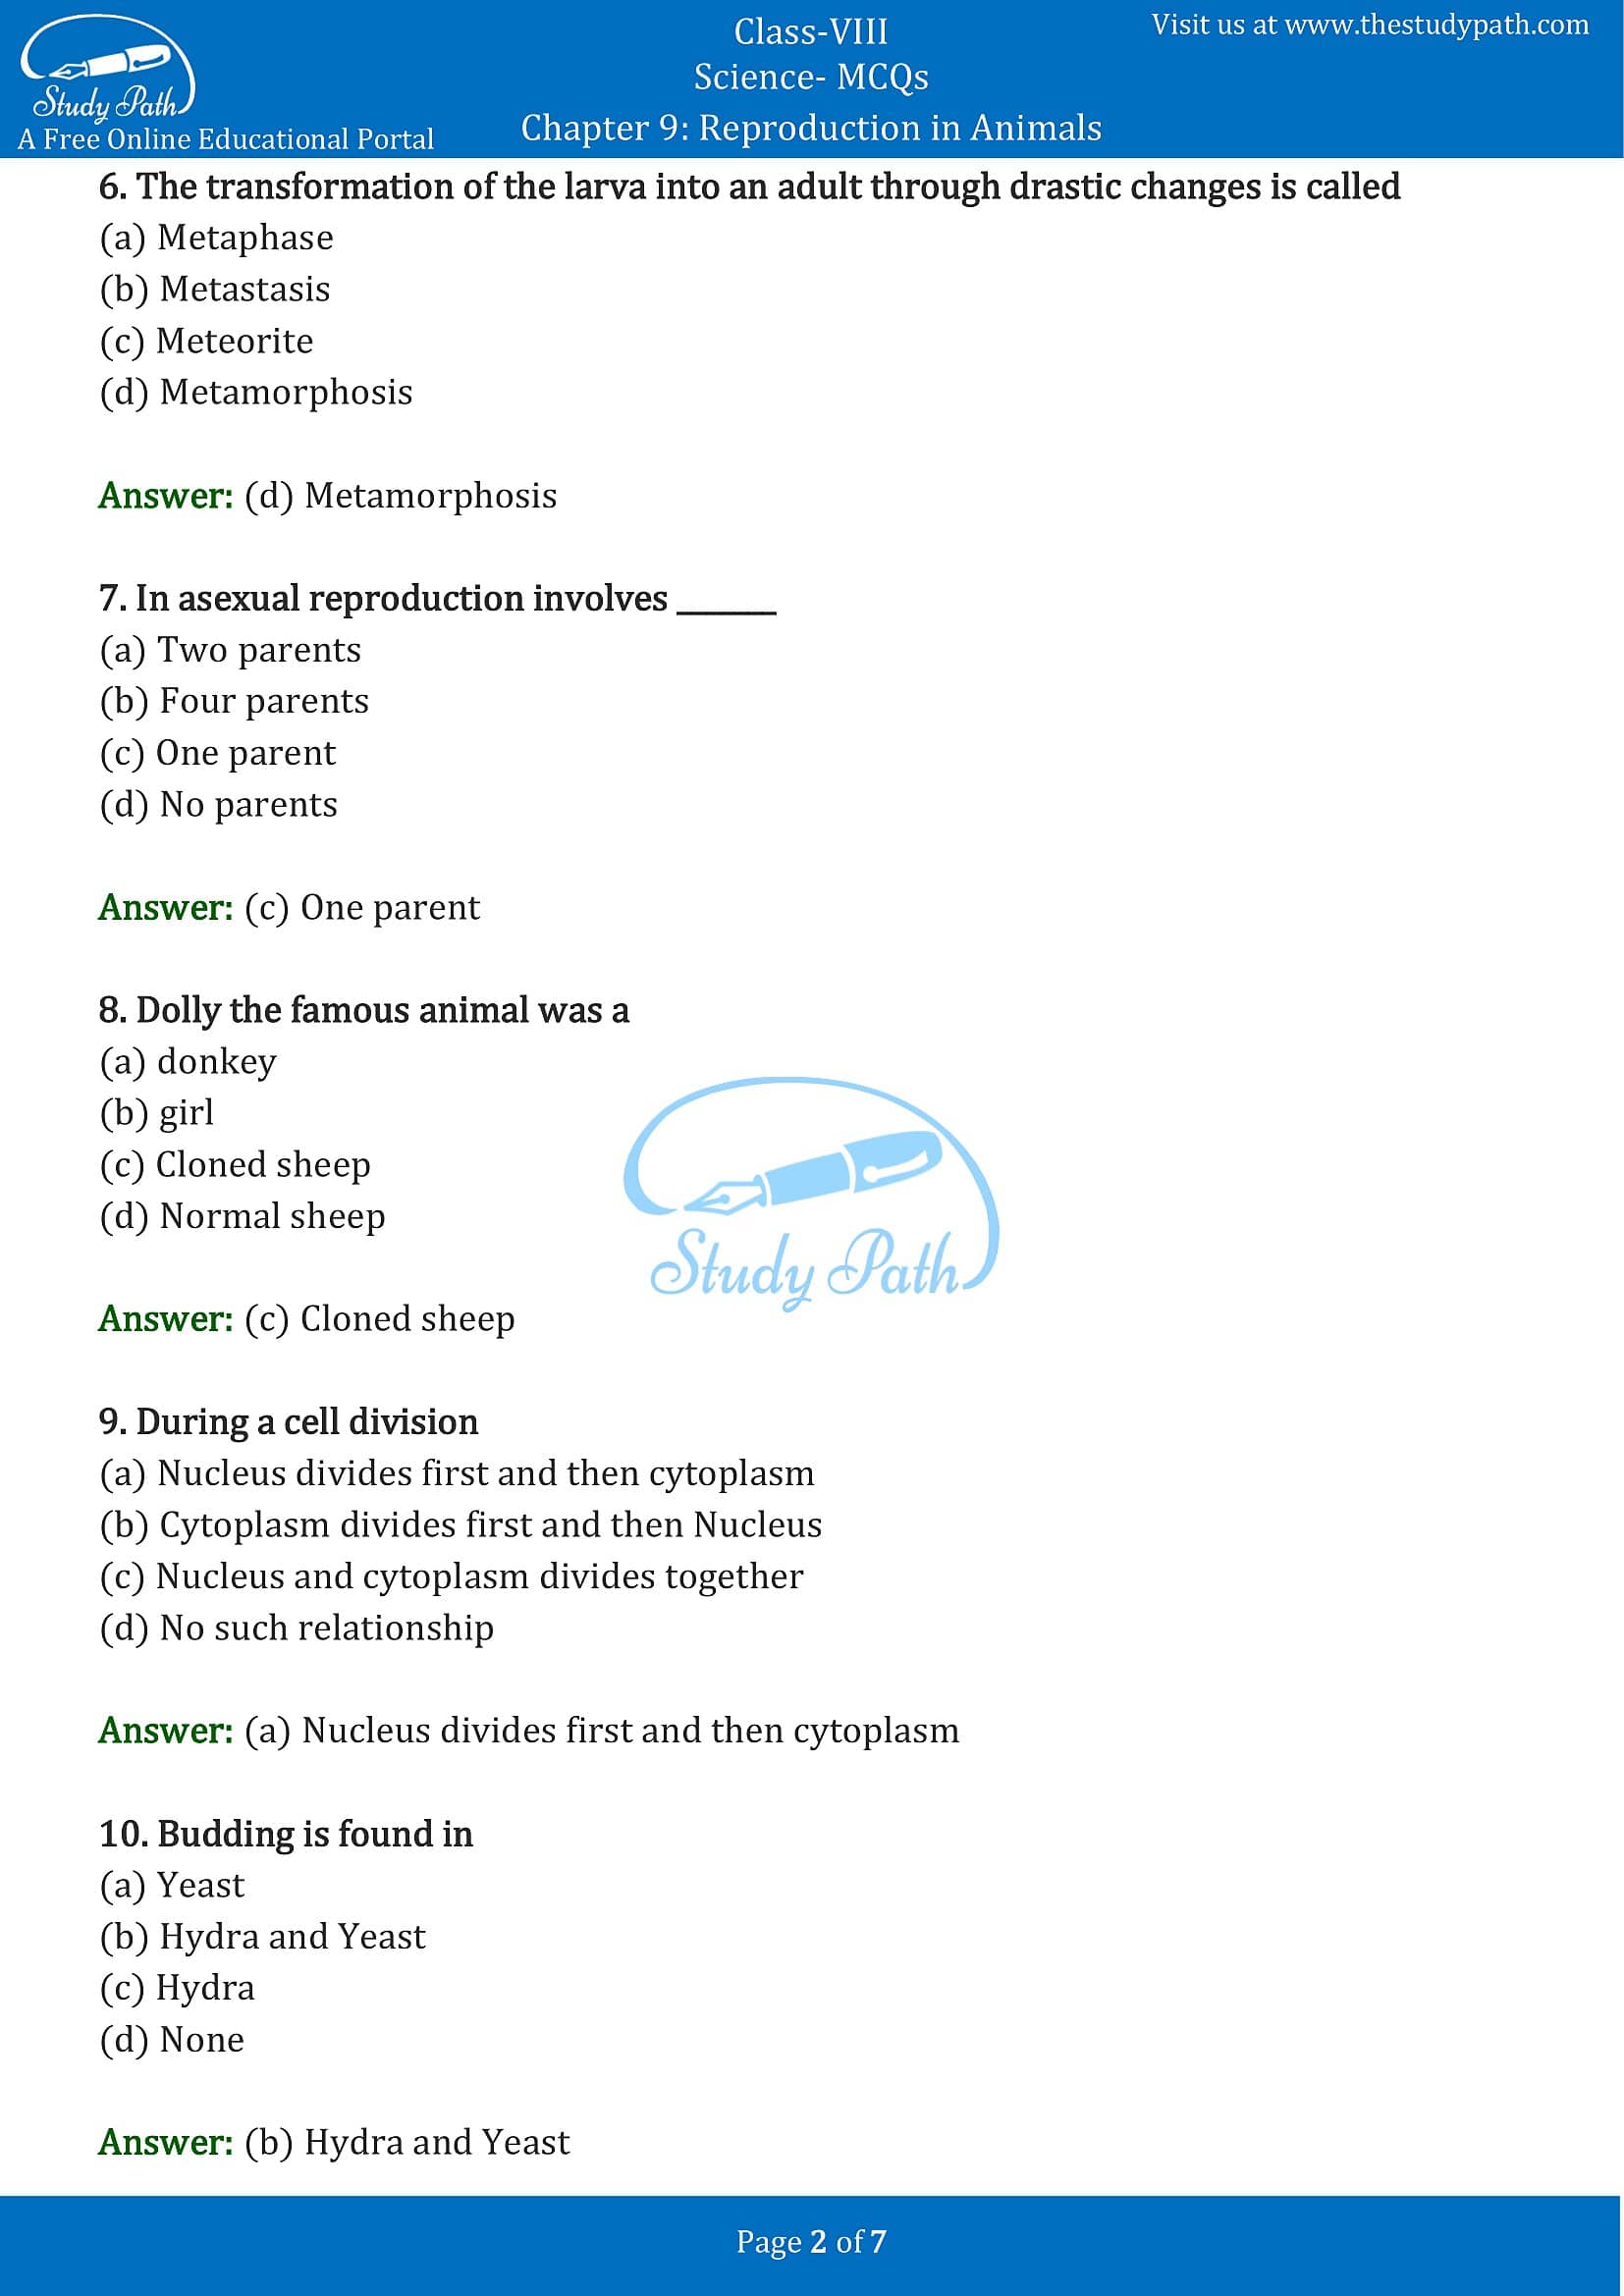 MCQ Questions for Class 8 Science Chapter 9 Reproduction in Animals with Answers PDF -2